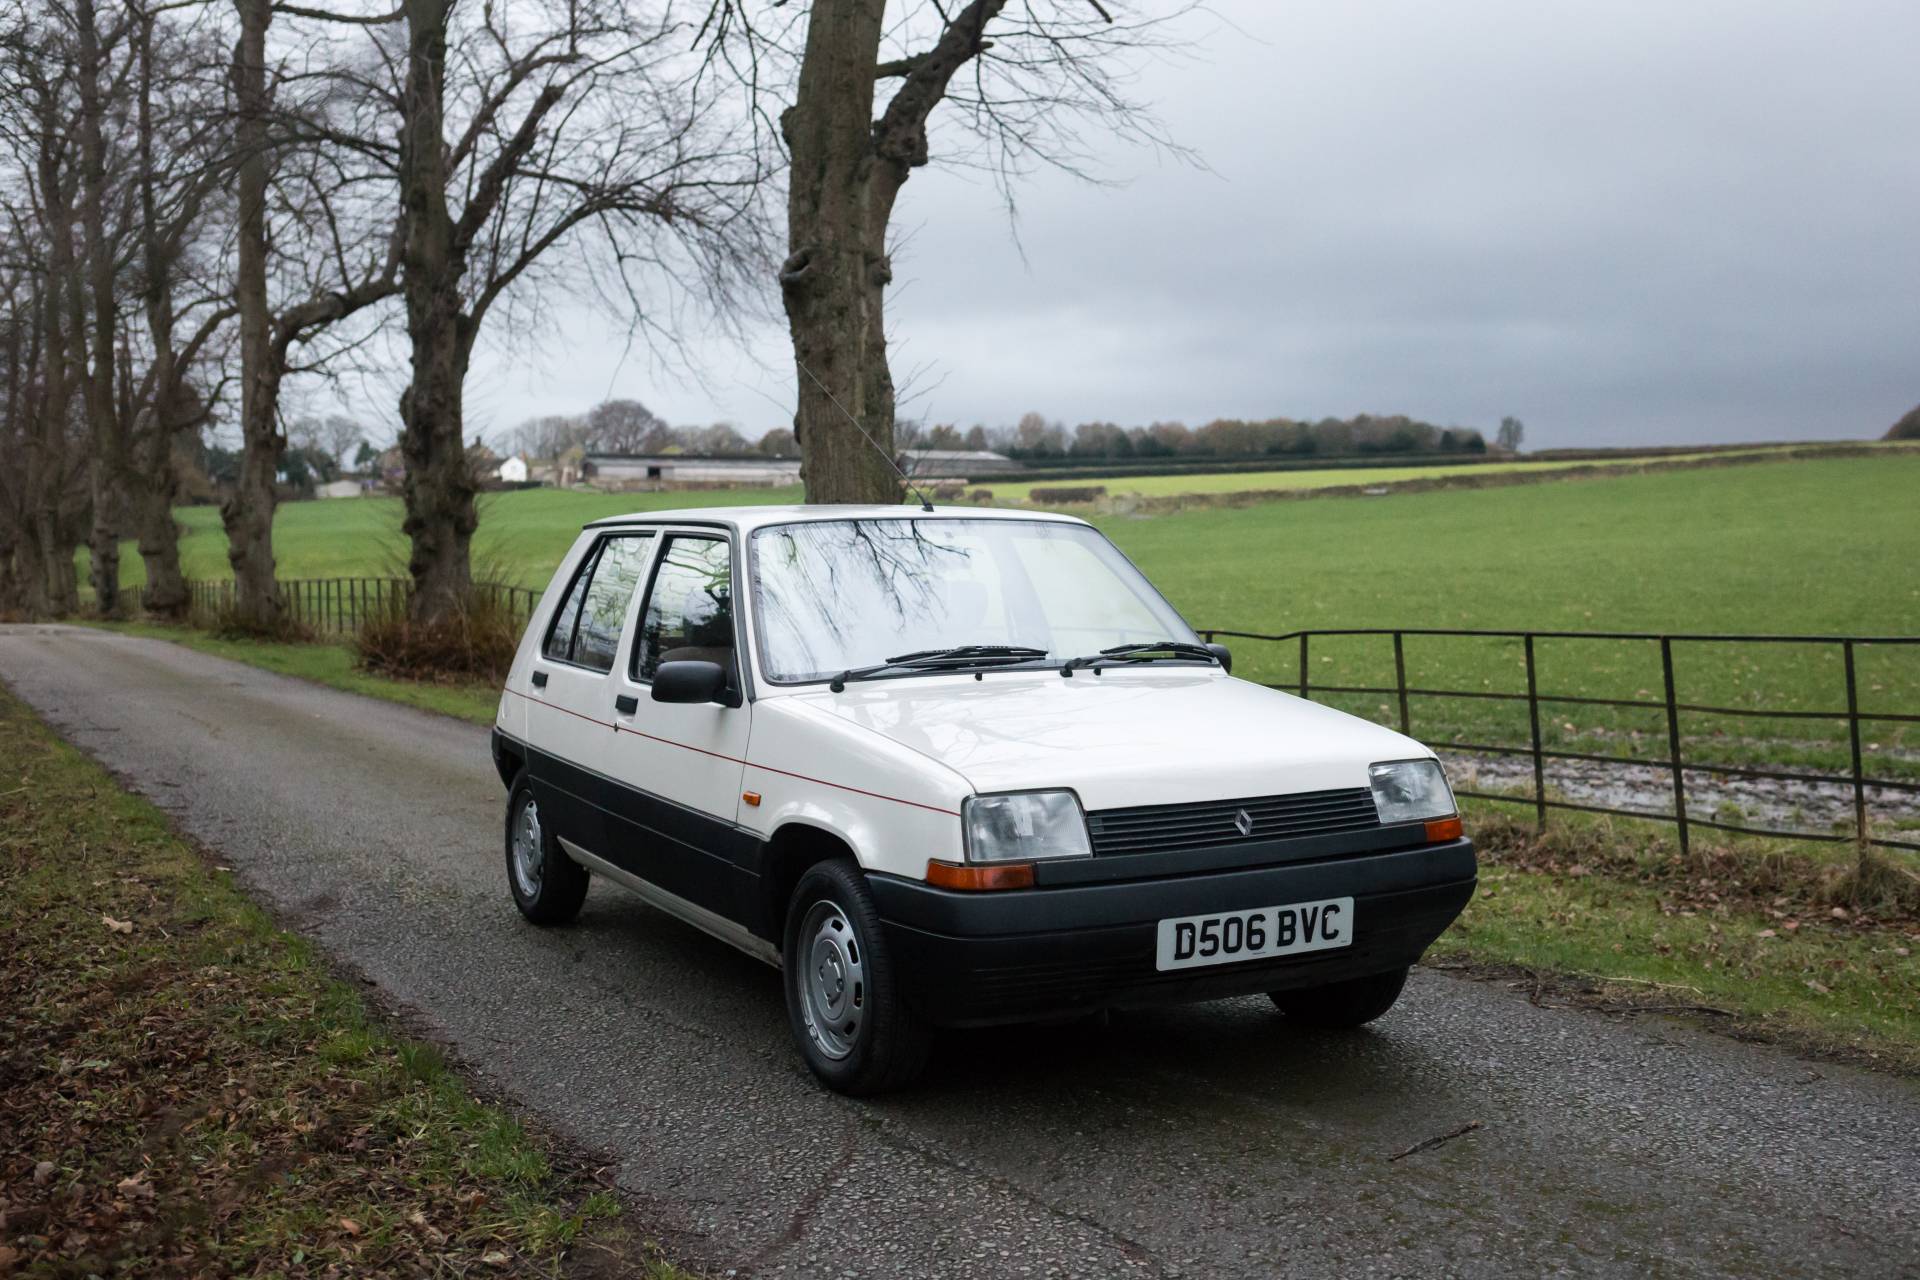 Renault R 5 1.0l - A great retro daily!